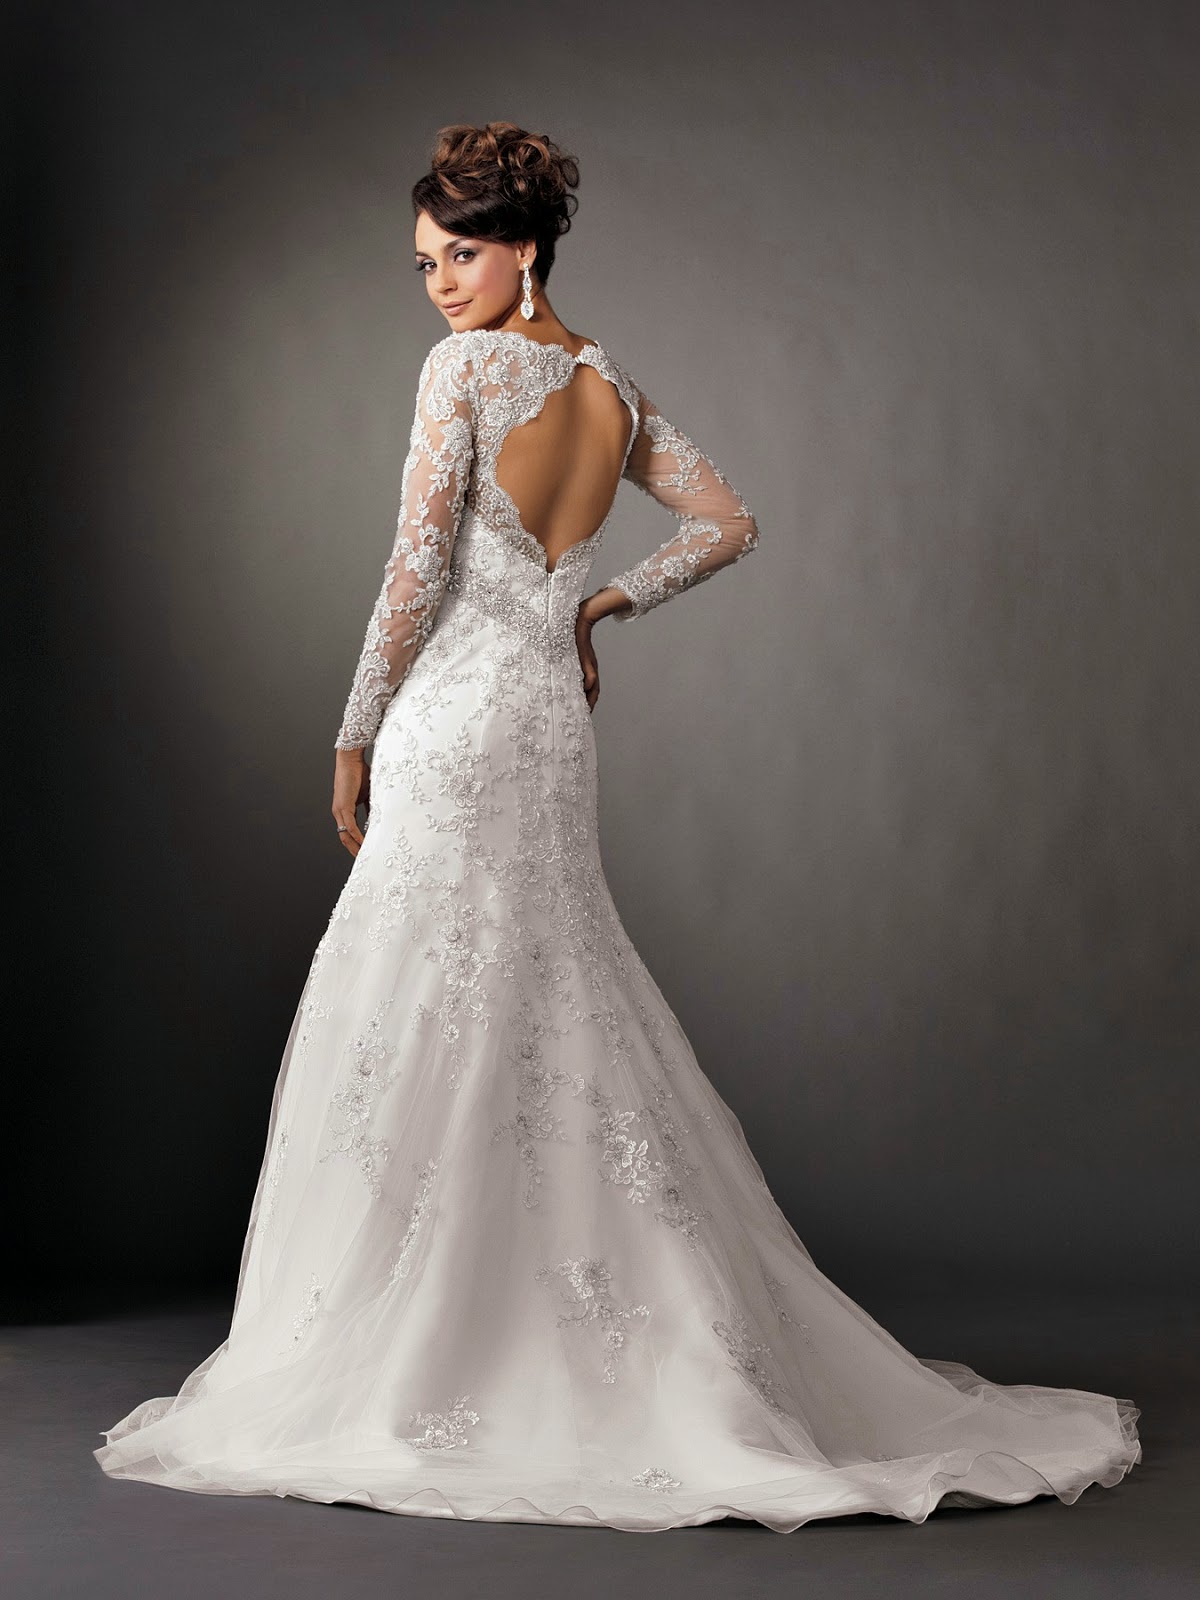 Lace Wedding Dresses with Sleeves